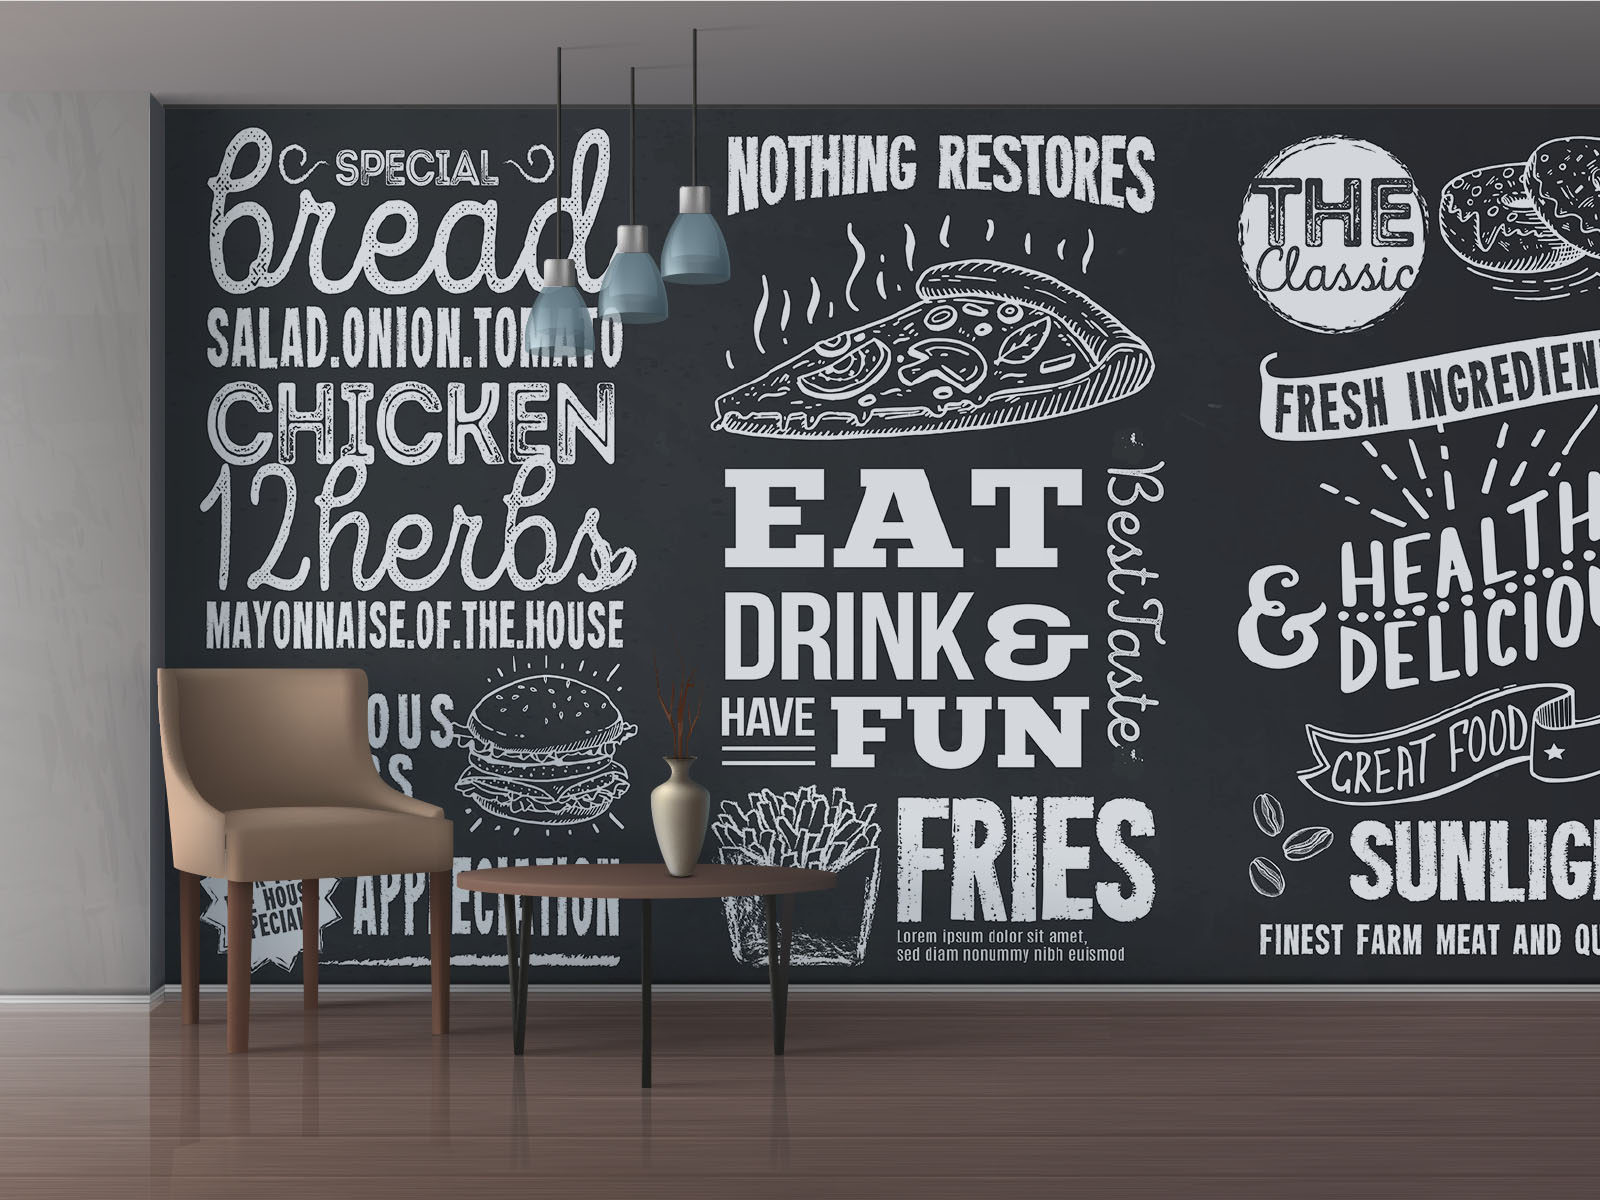 Restaurant Wall Design by aju pulickal on Dribbble